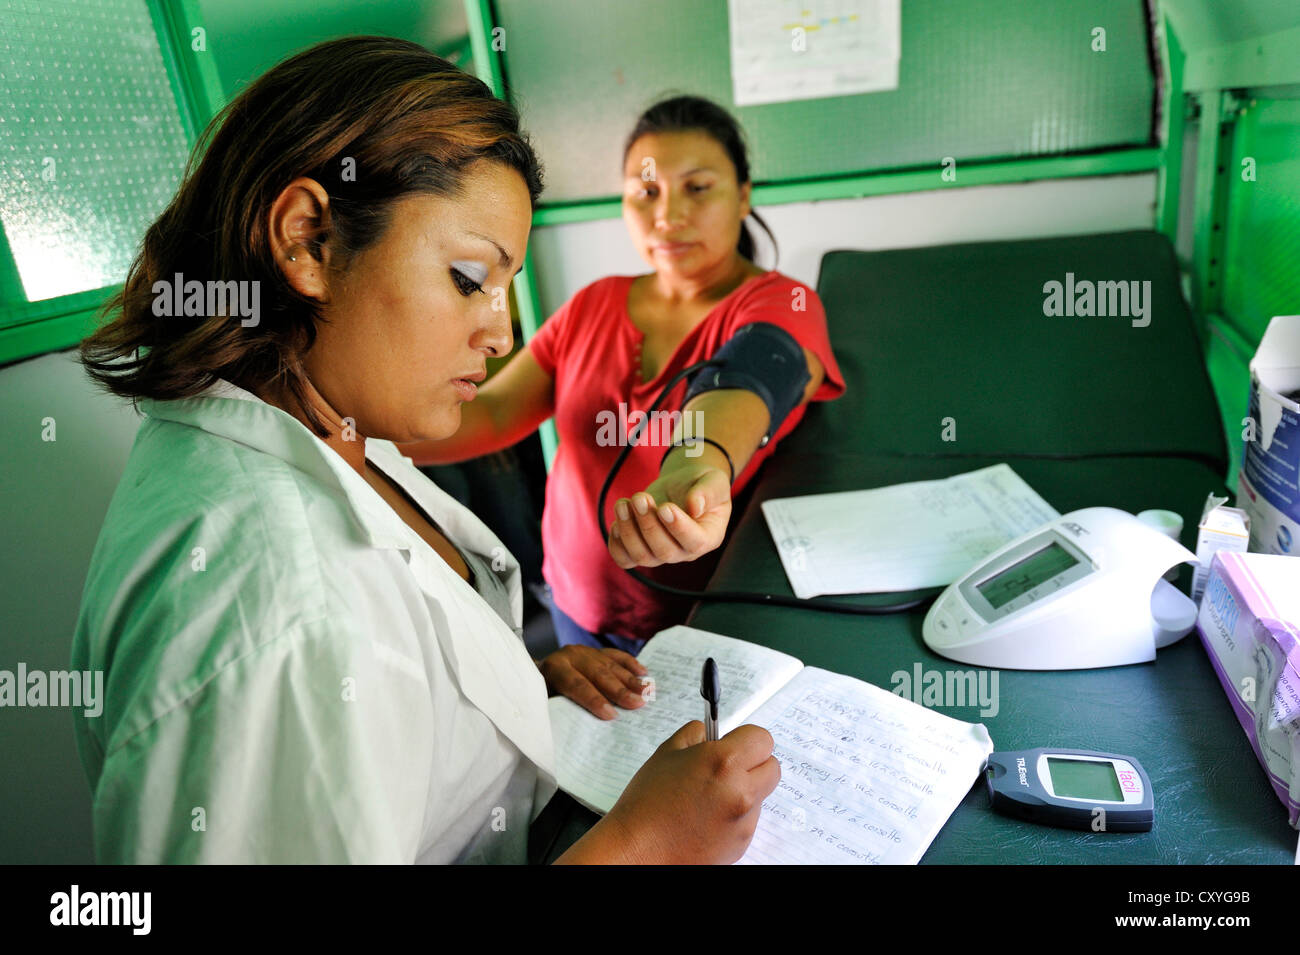 Nurse checking the blood pressure of a young woman, Guatemala, Central America Stock Photo